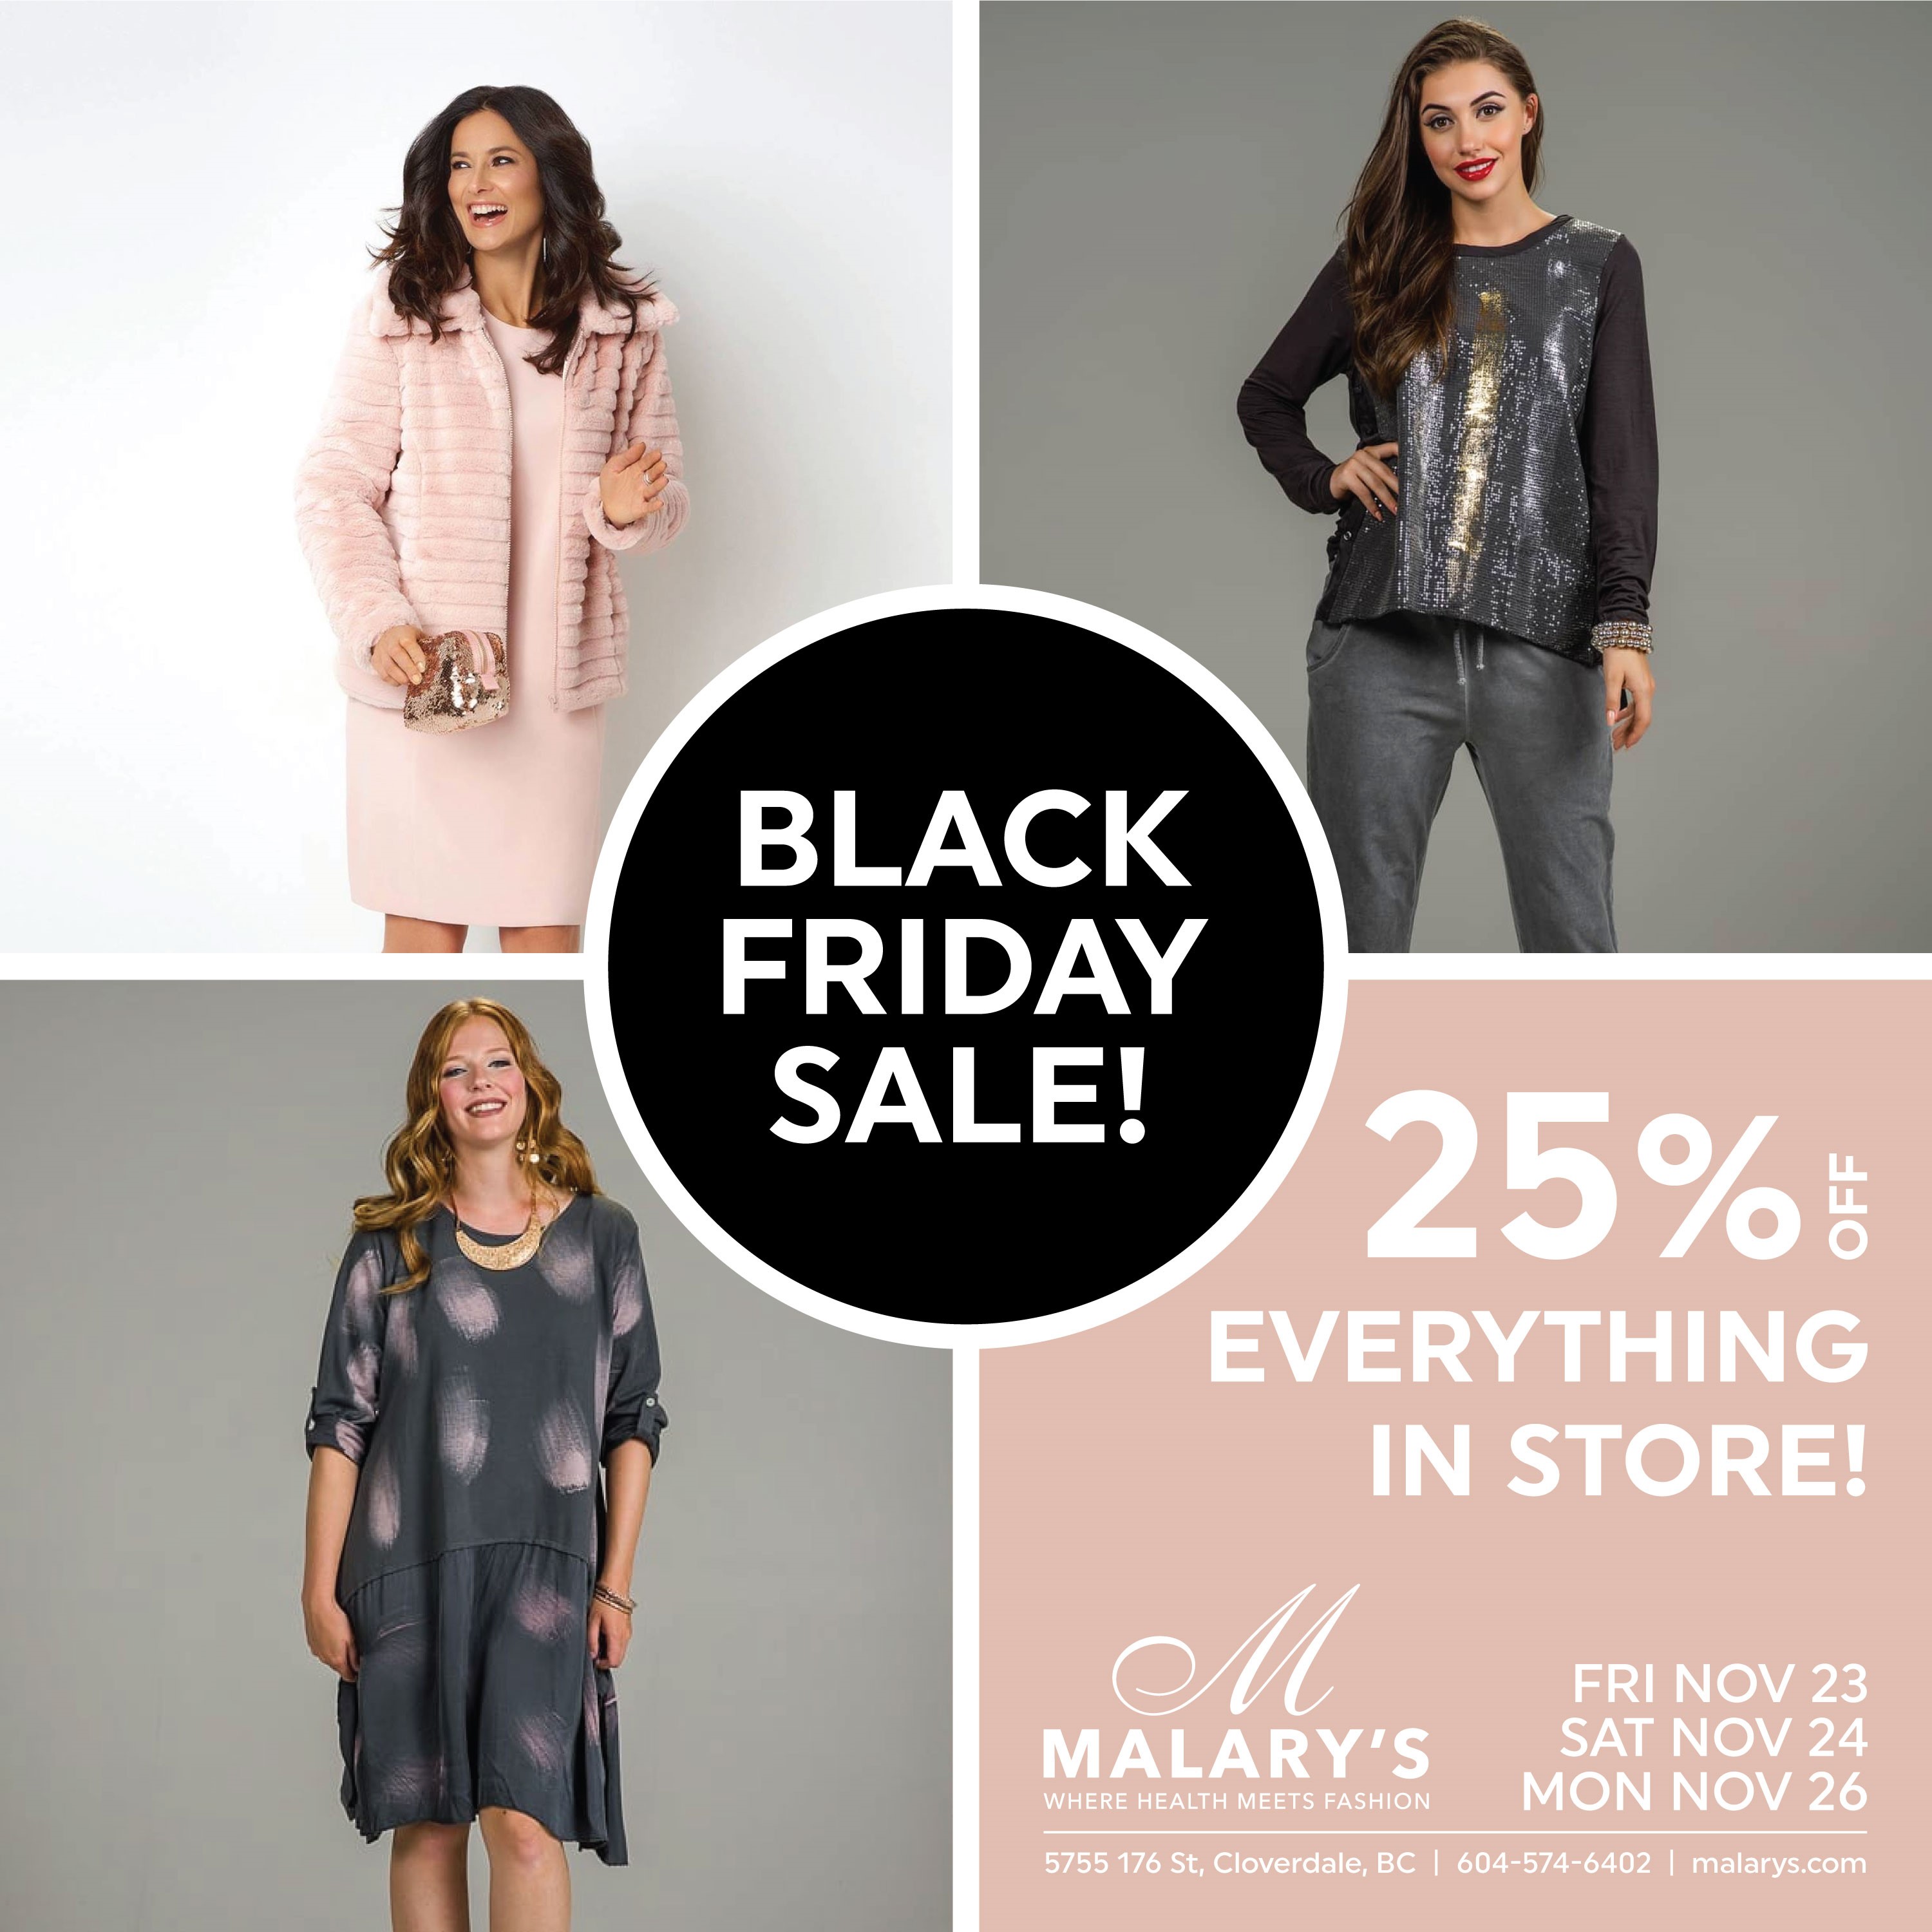 Black Friday Sale at Malarys! 25% off the entire store starting Friday